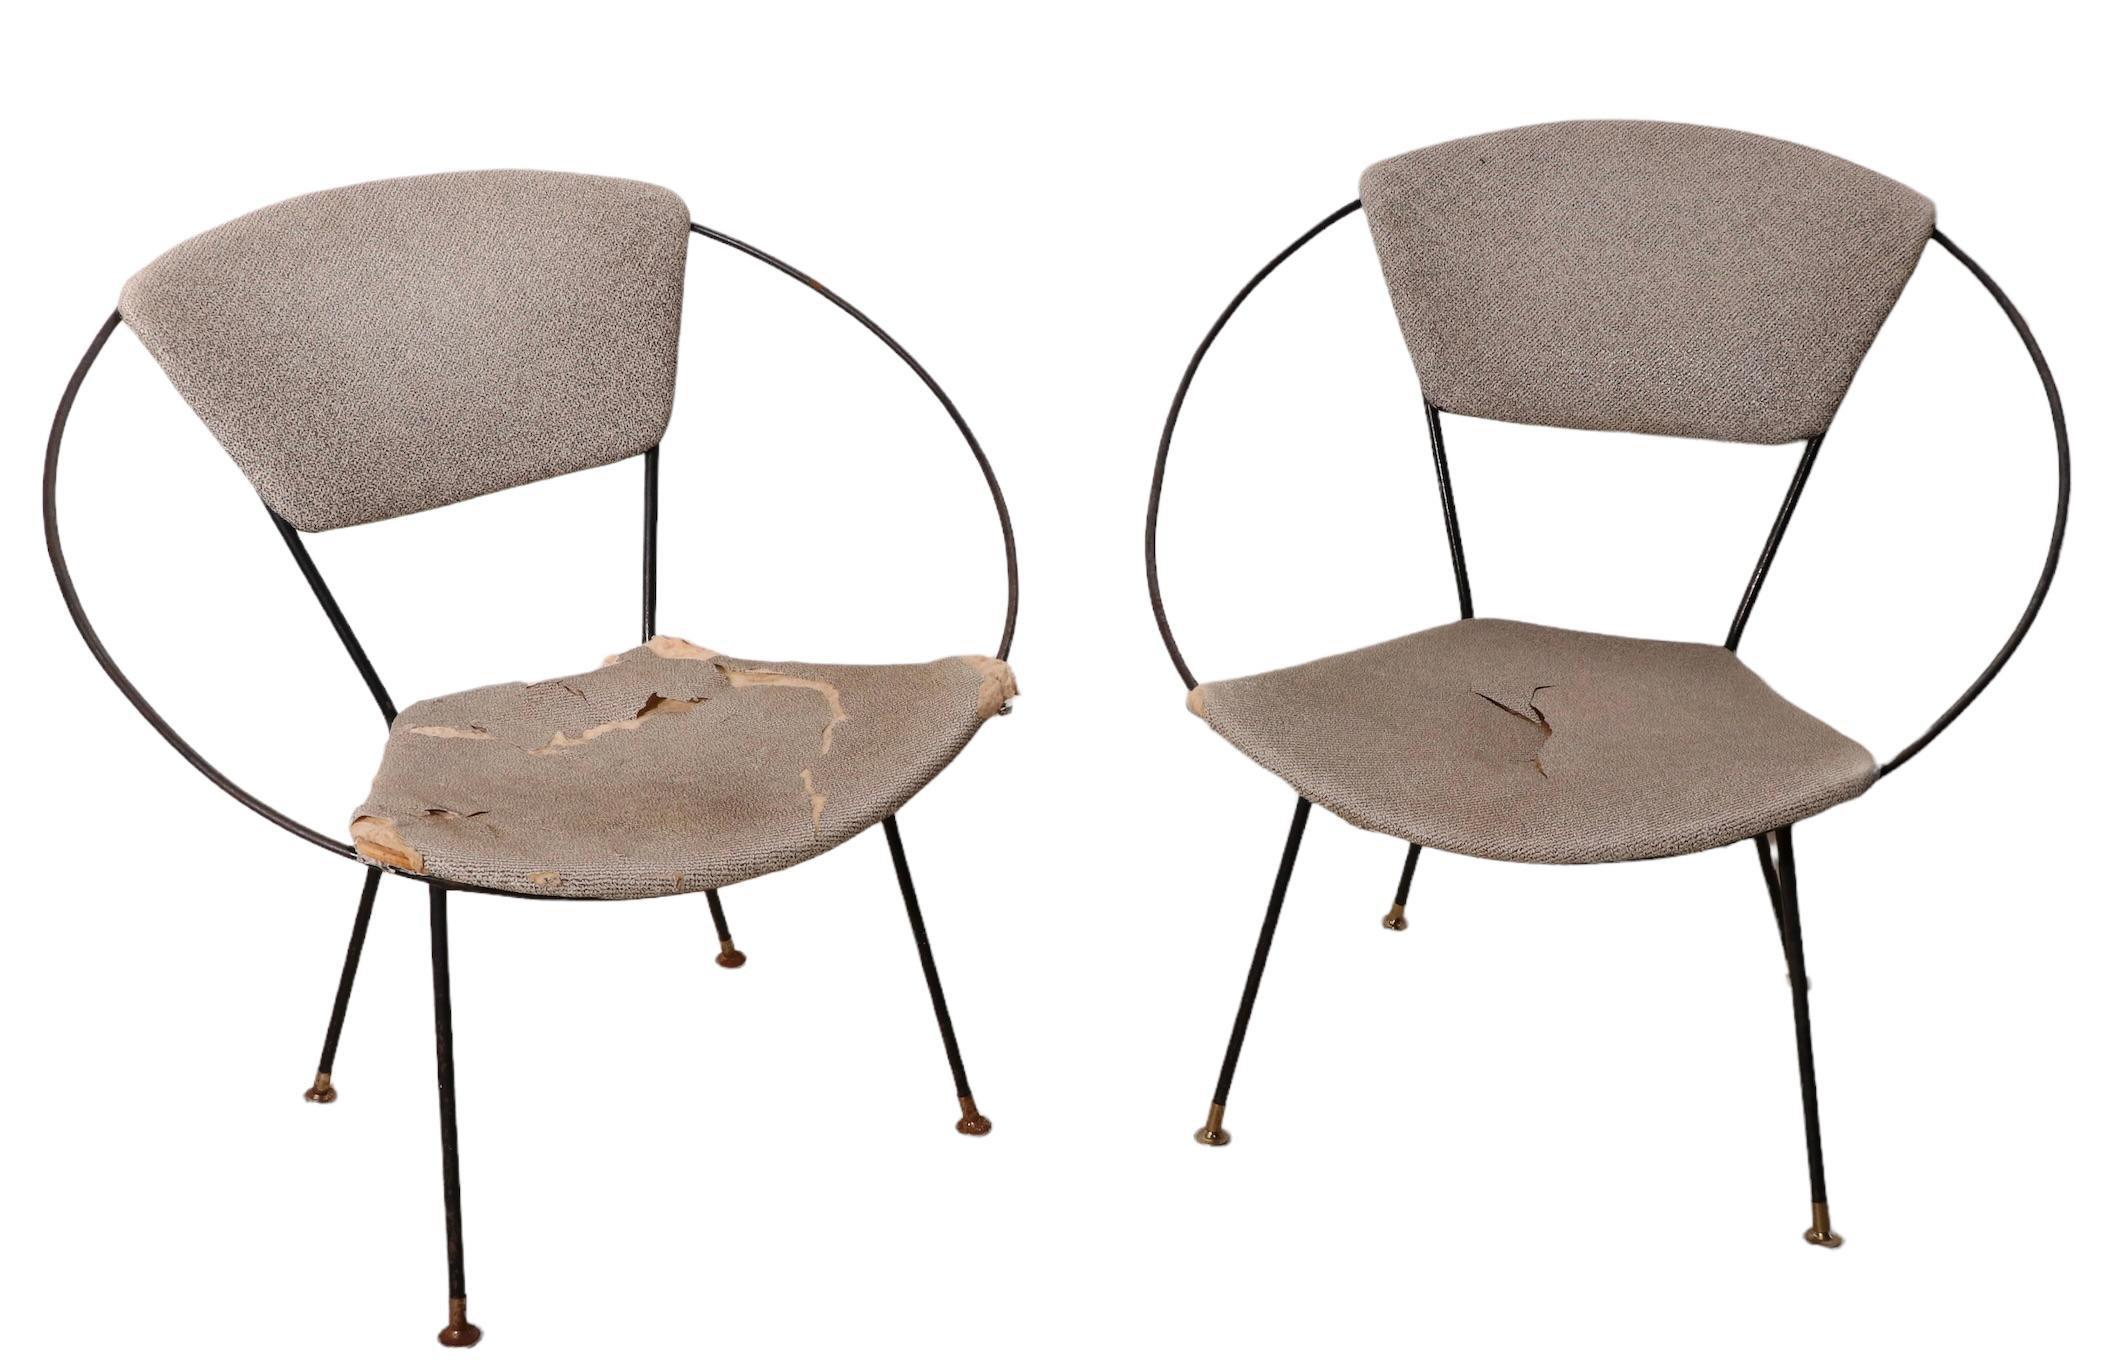 Pr. Wrought Iron Mid Century Hoop Chairs by John Cicchelli for Riley Wolff 1950s For Sale 1